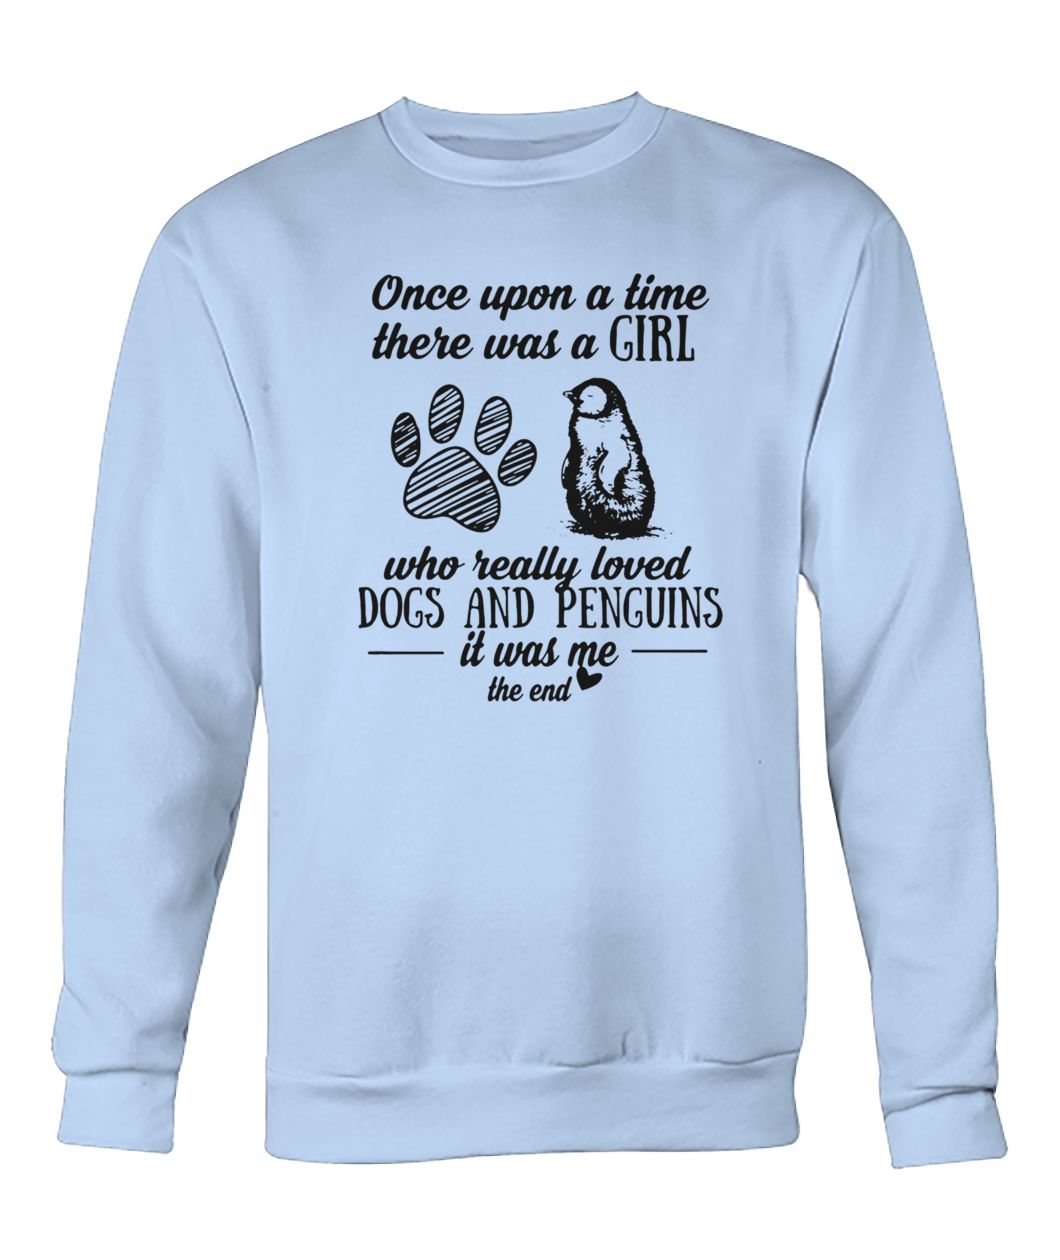 Once upon a time there was a girl who really loved dogs and penguins it was me the end crew neck sweatshirt